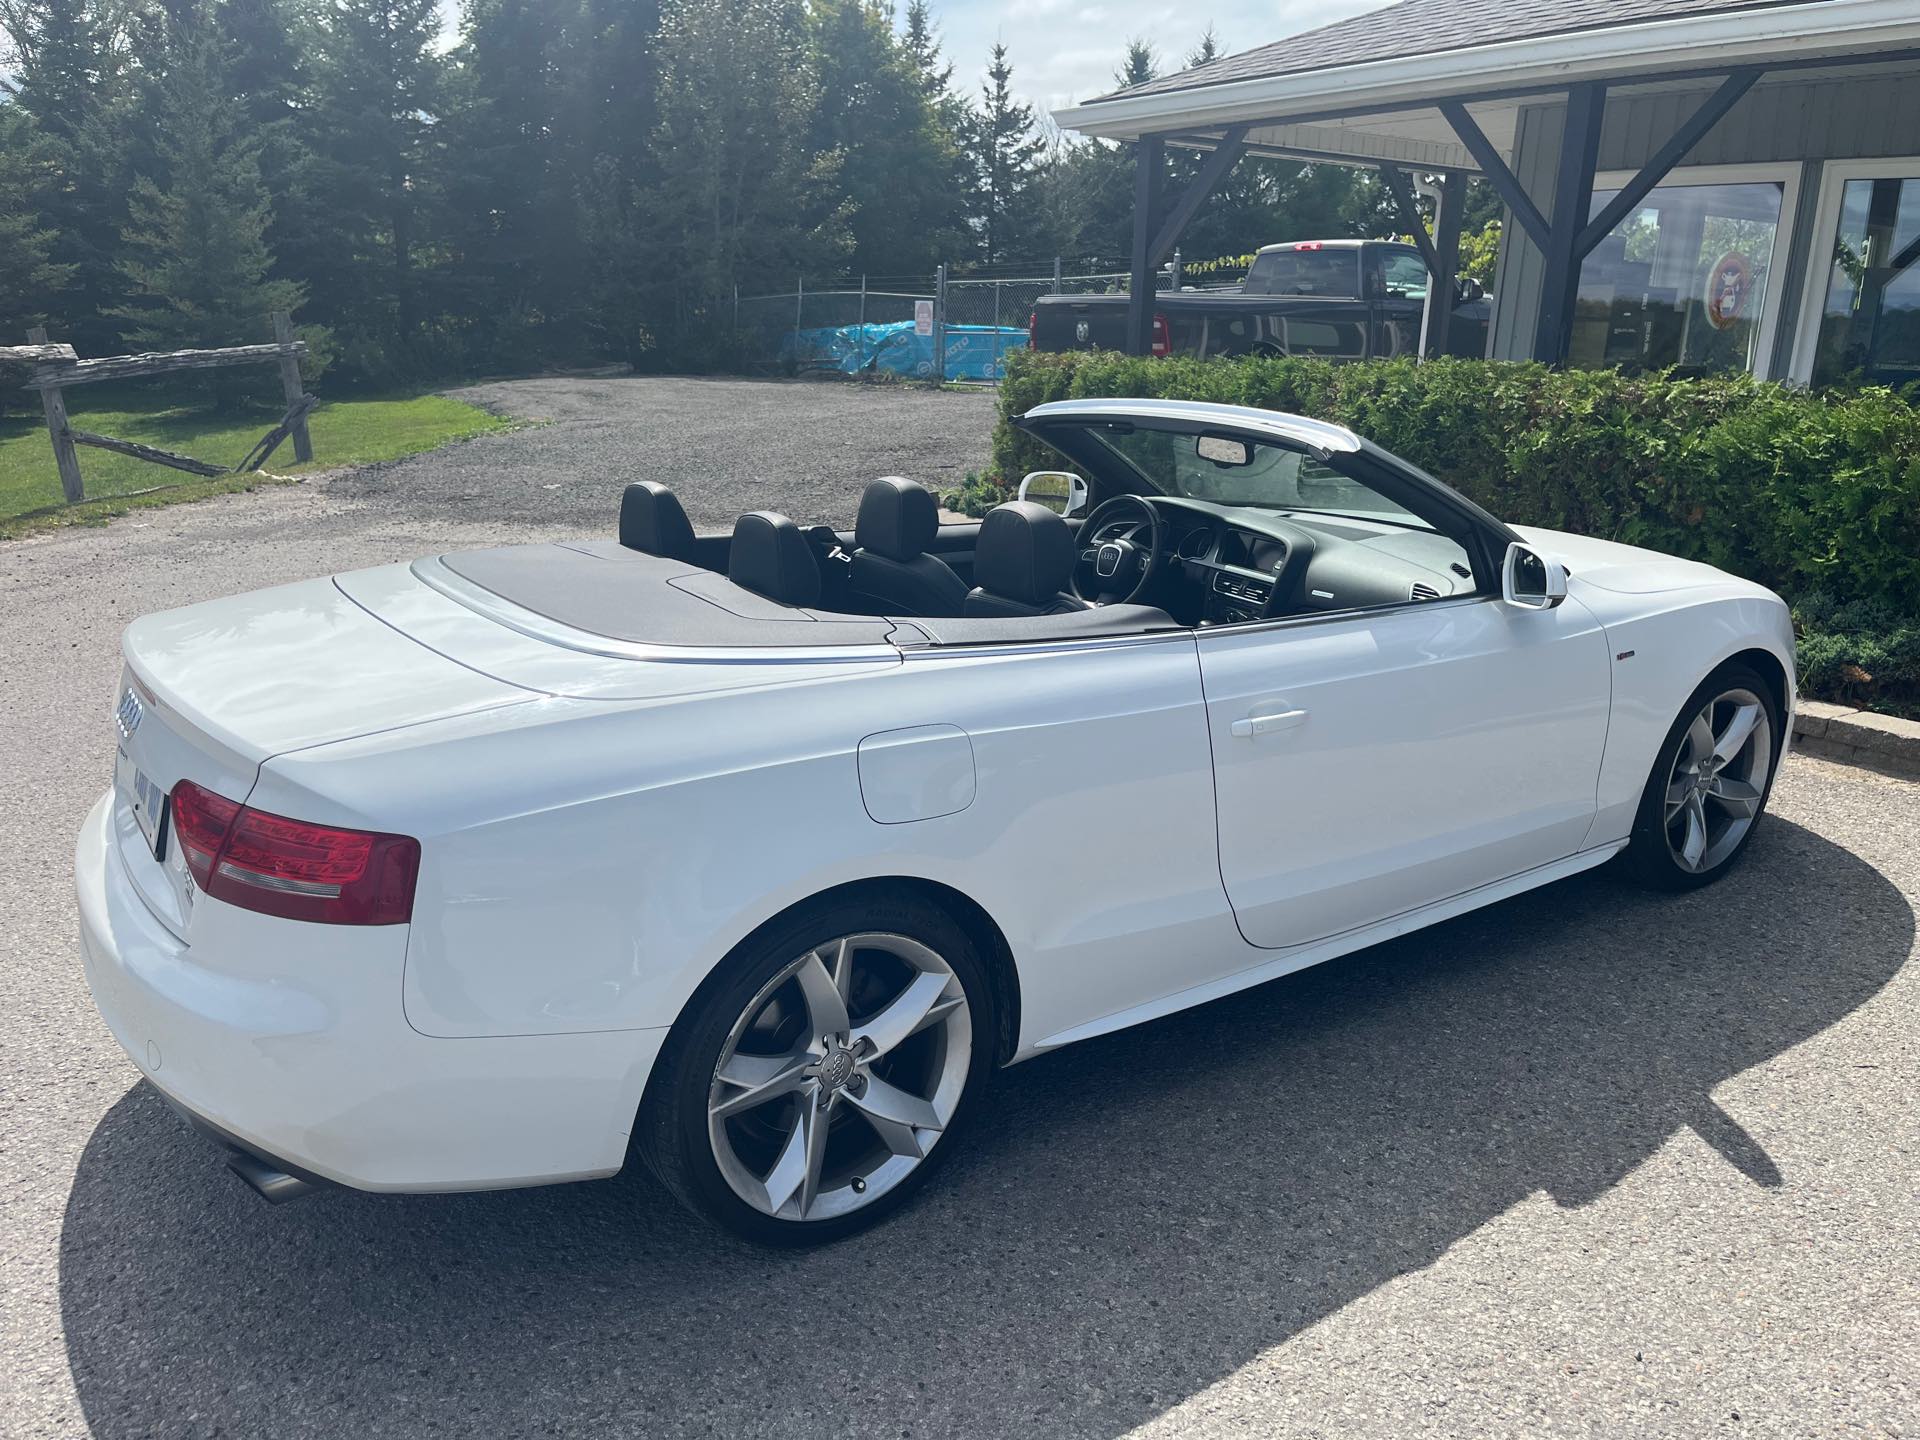 2010 OTHER 20T SLINE AUDI A5 at DT Powersports & Marine